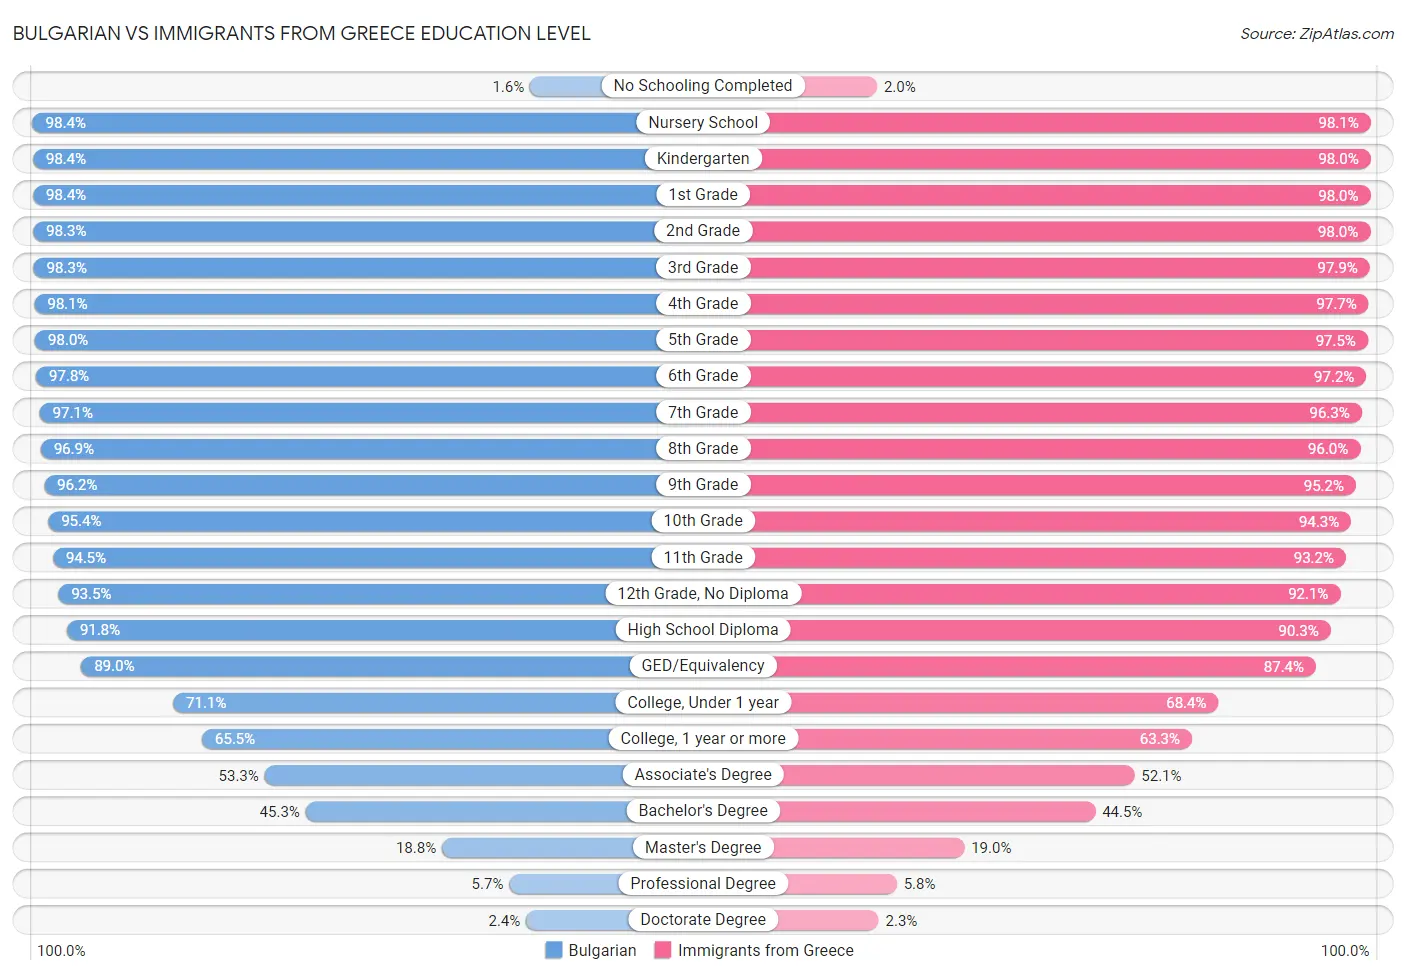 Bulgarian vs Immigrants from Greece Education Level